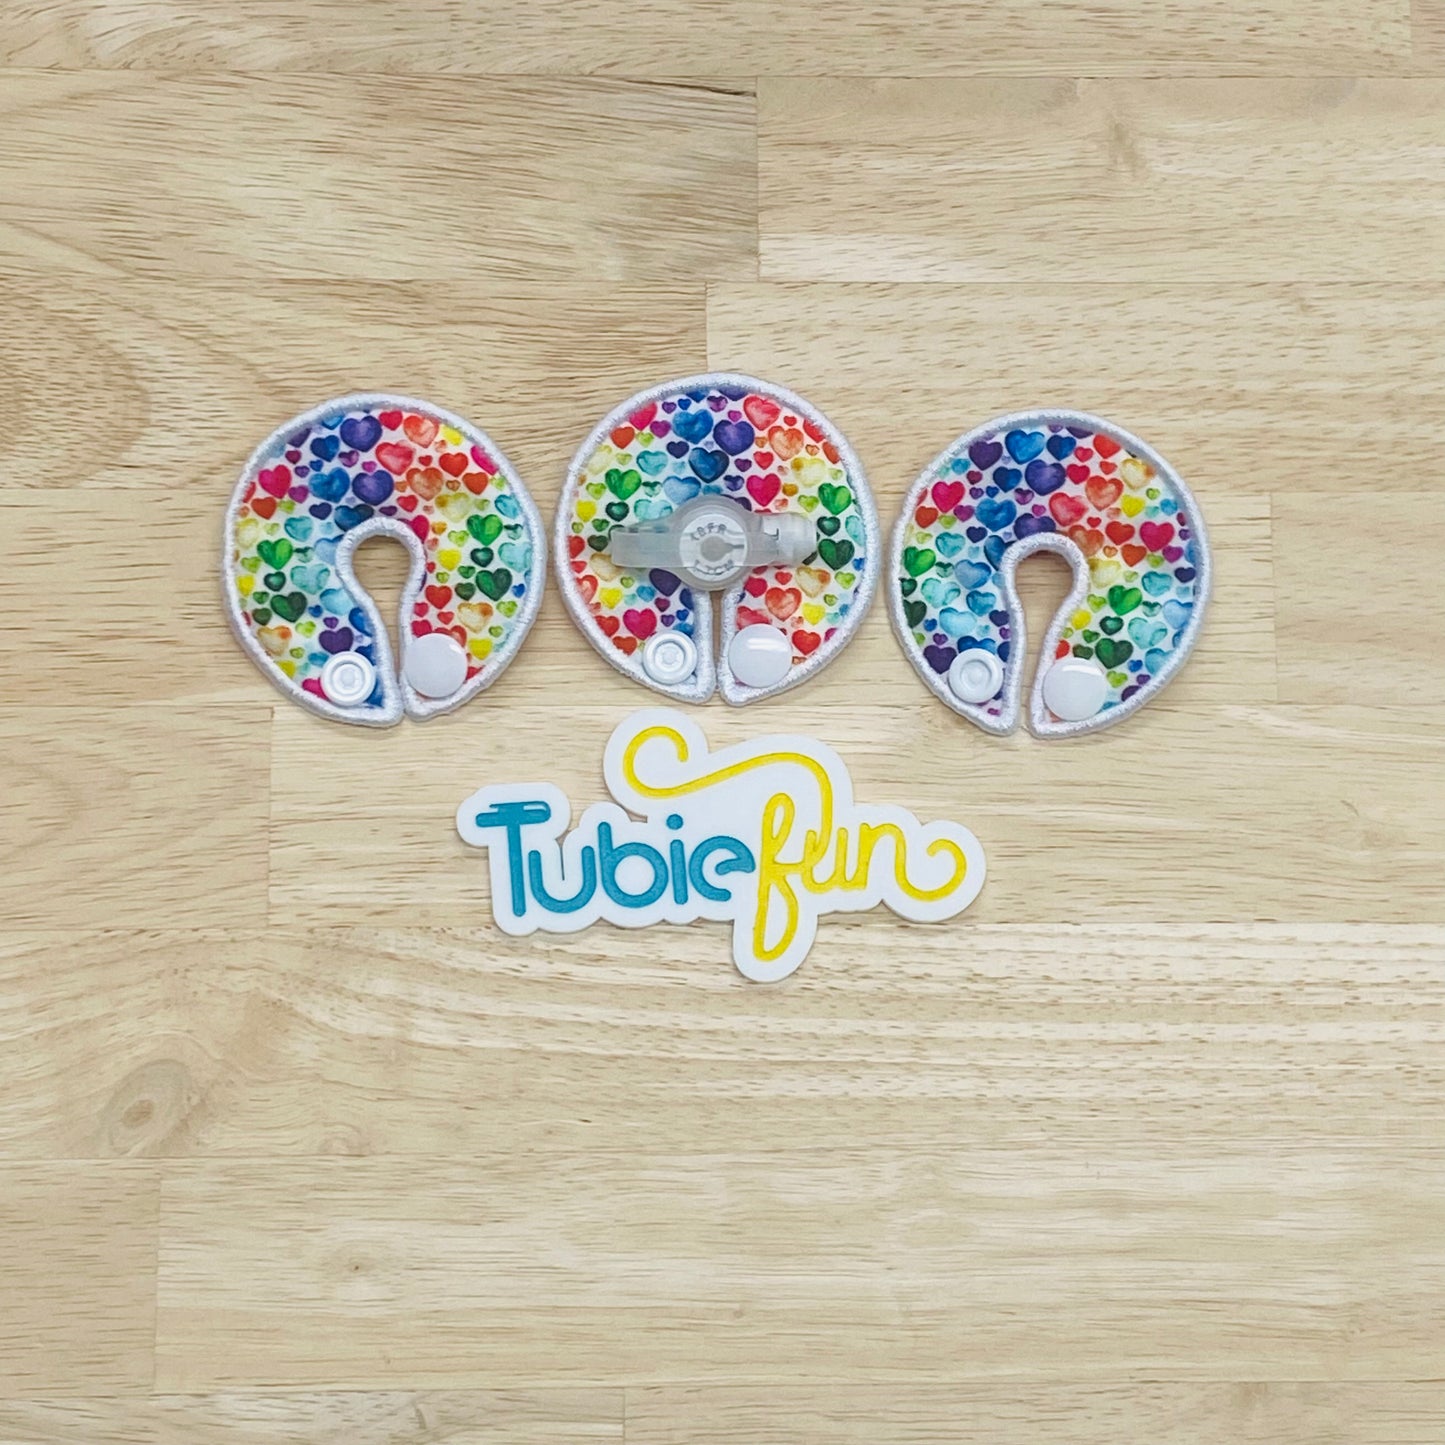 G-Tube Button Pad Cover - Multicoloured Hearts on White